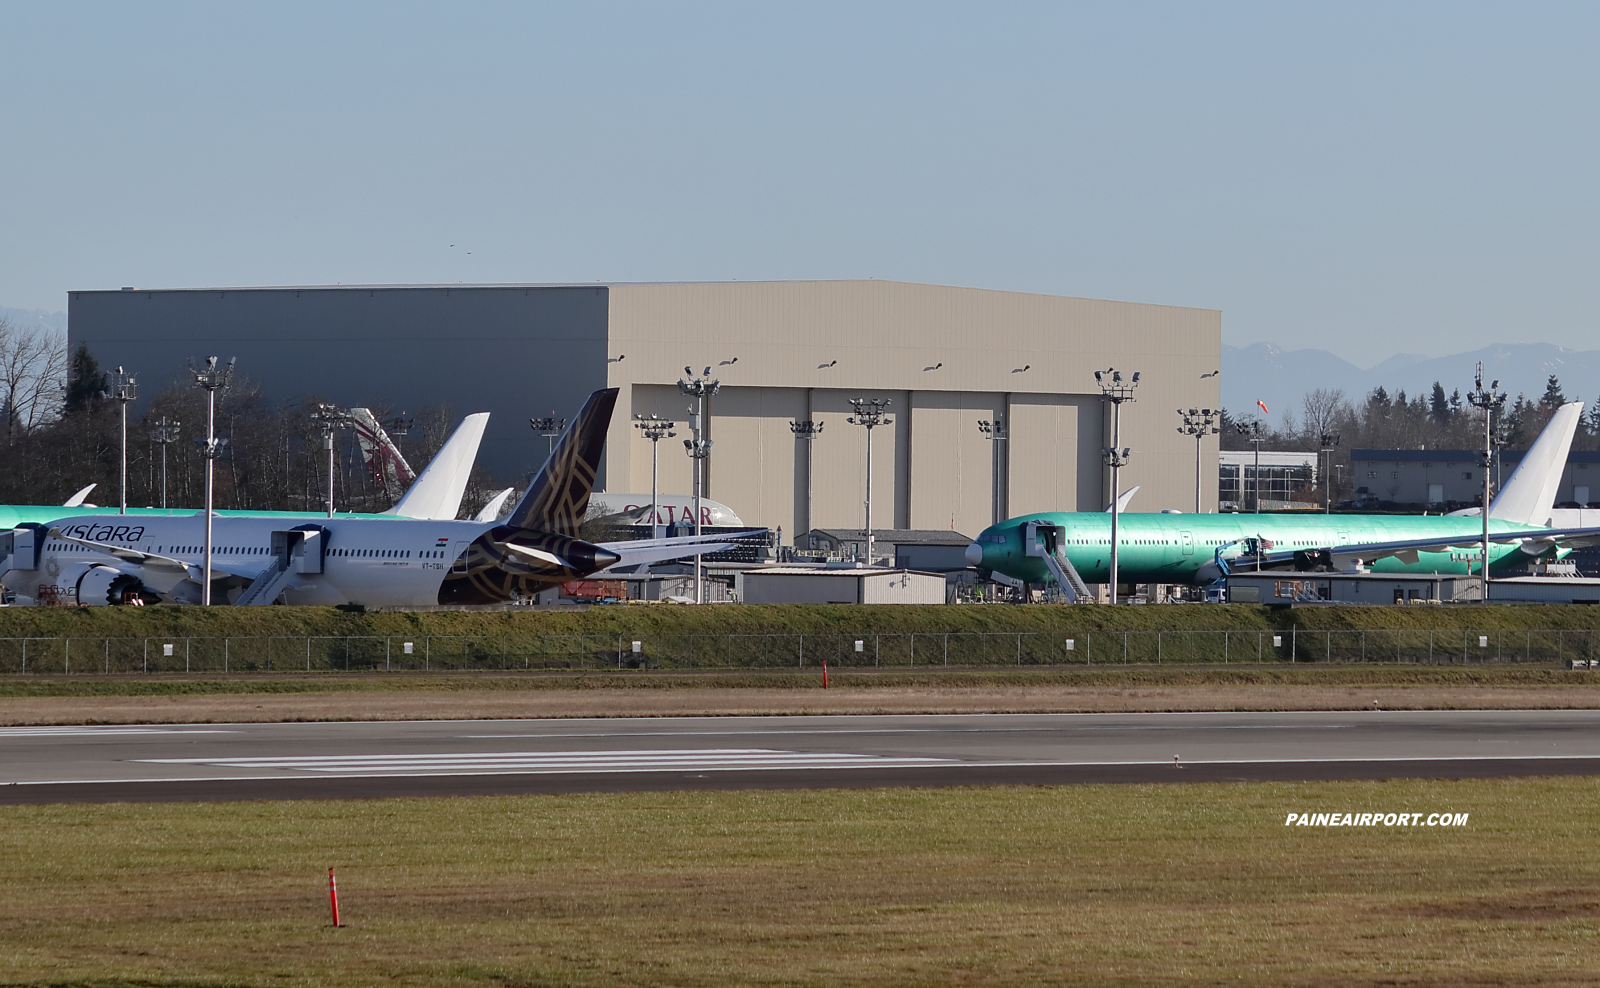 Boeing 45-12 building at KPAE Paine Field